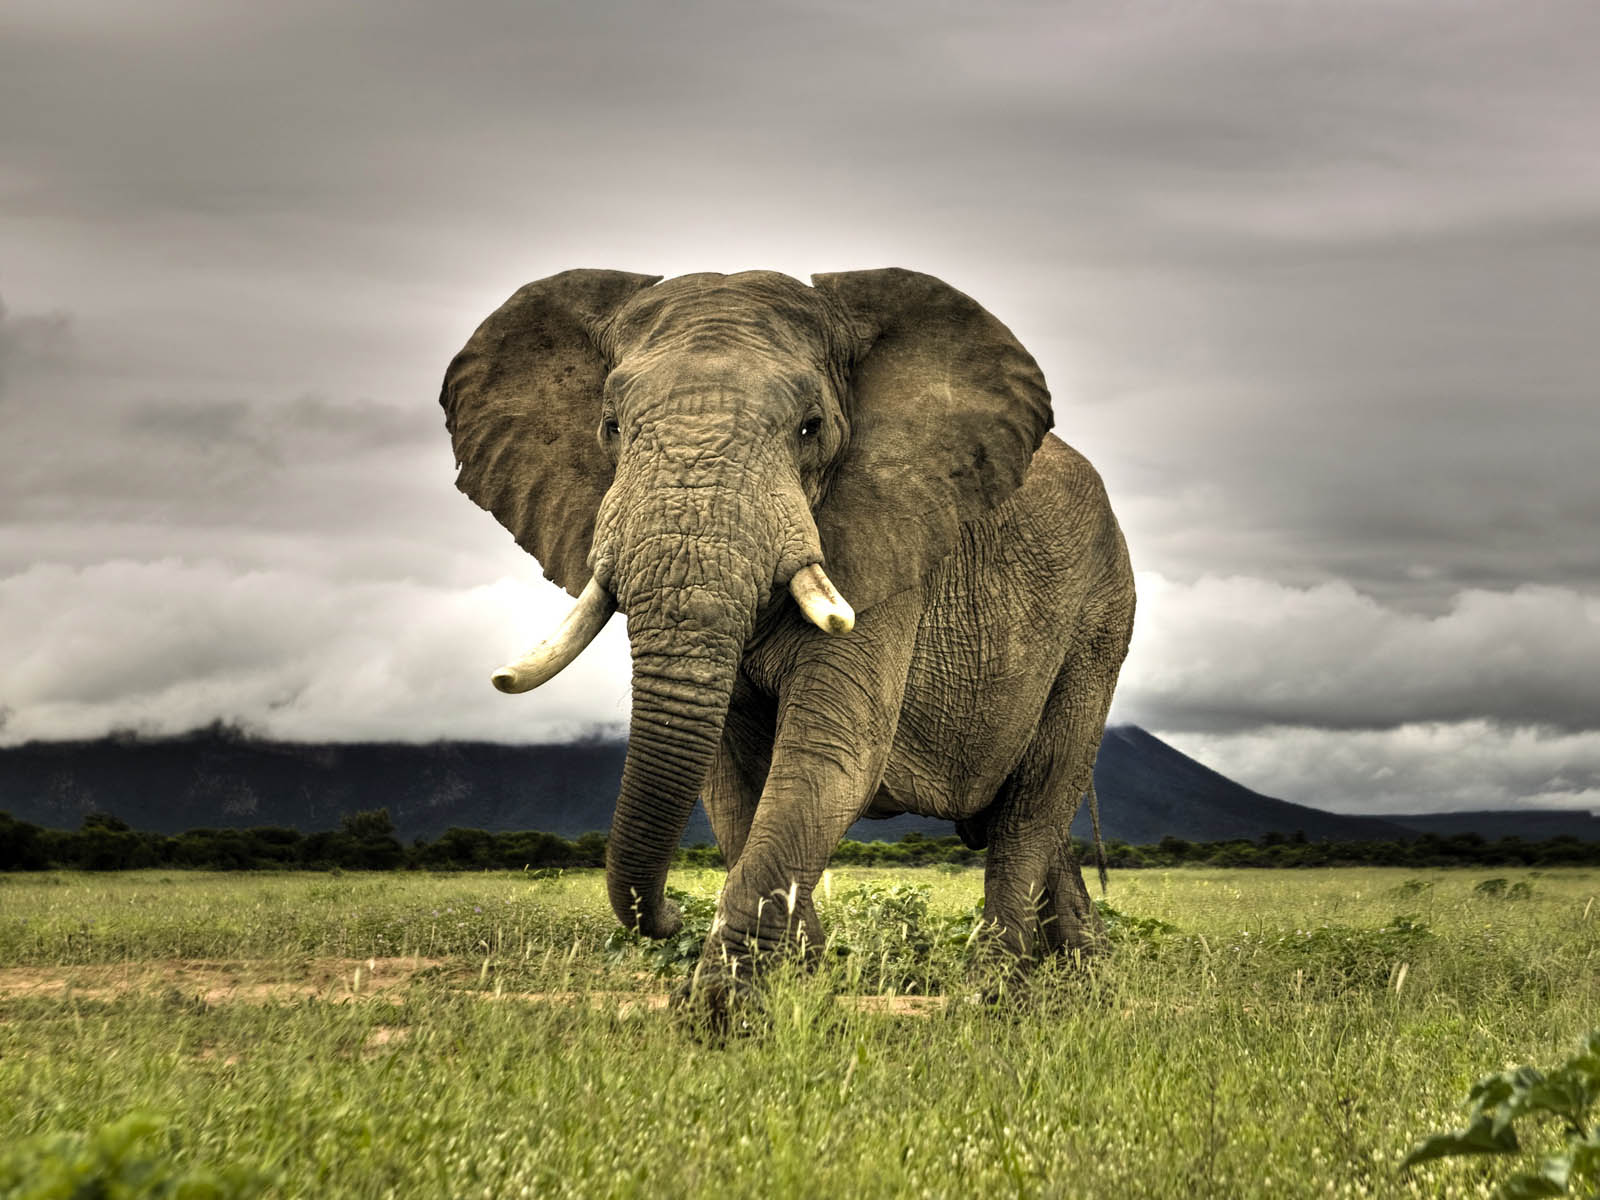 Tag Elephant Wallpaper Image Photos Pictures And Background For